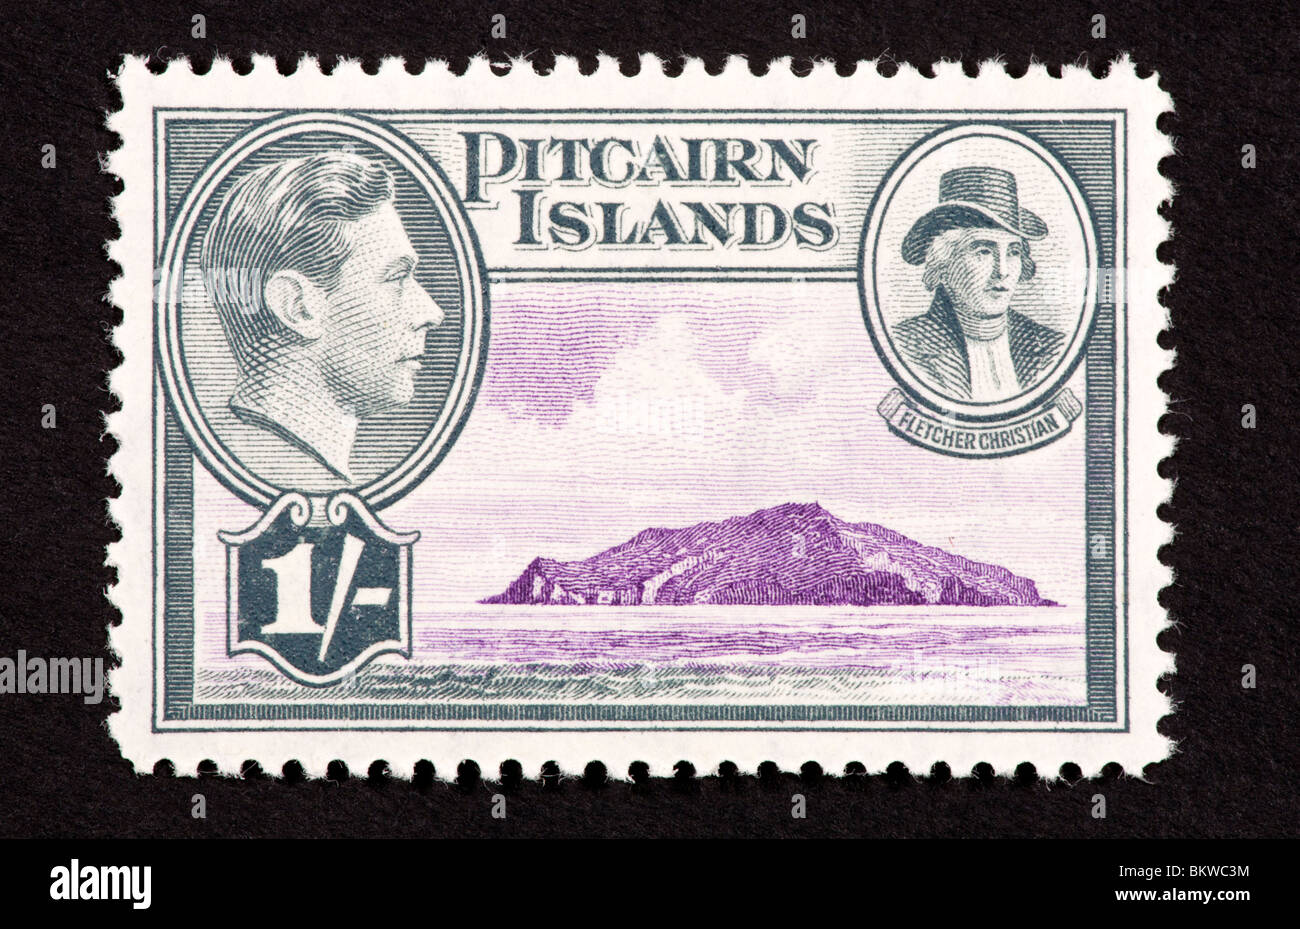 Postage stamp from the Pitcairn Islands depicting Pitcairn Island, George Fletcher  and George VI. Stock Photo